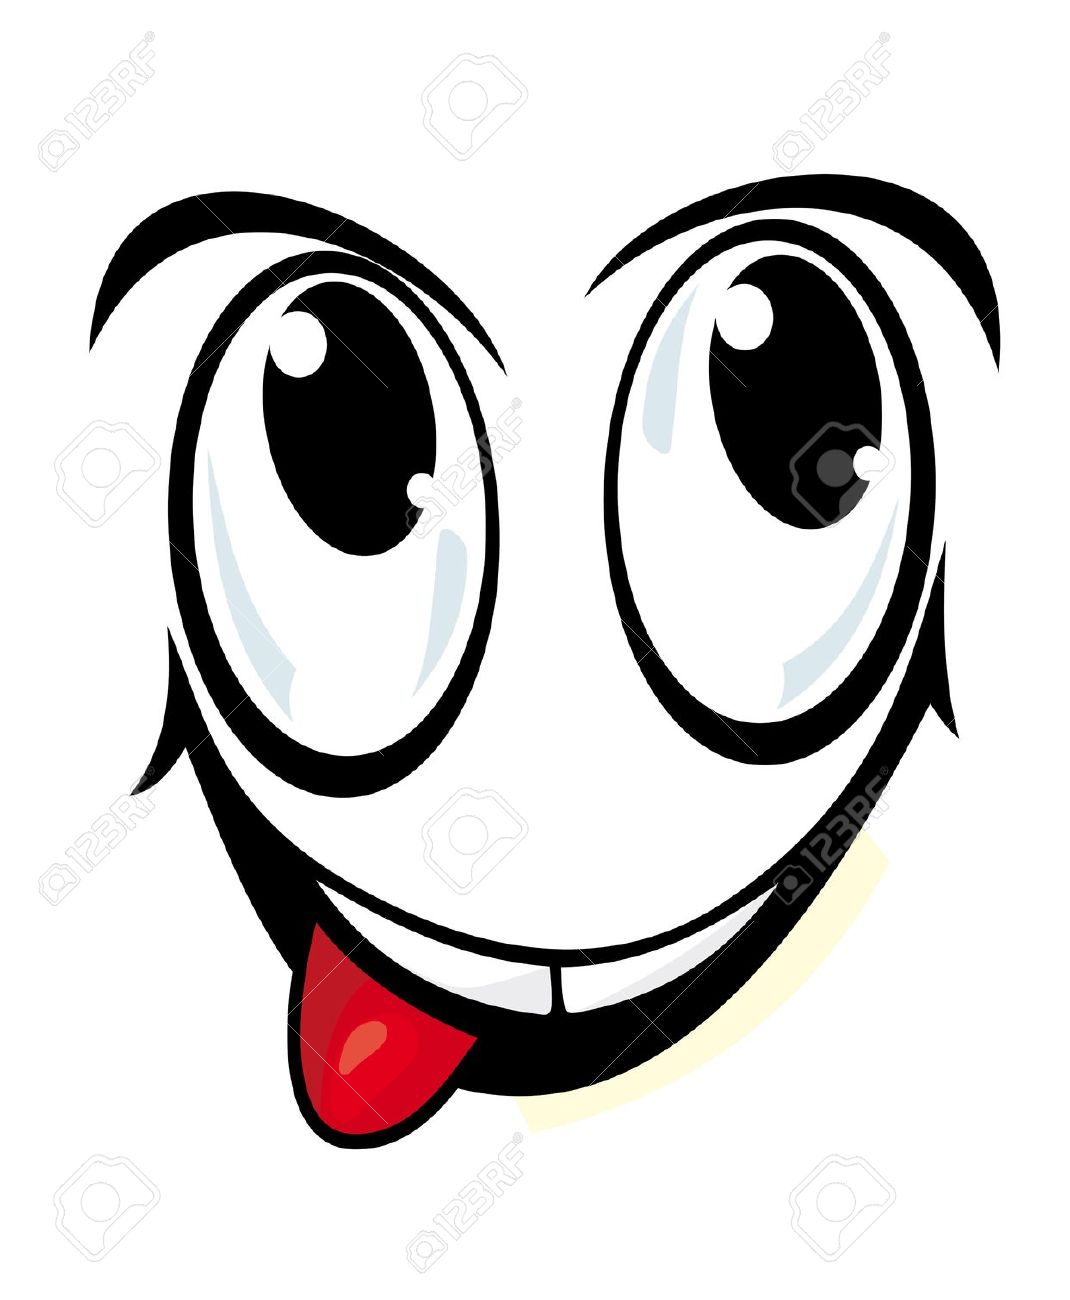 Smiling eyes clipart.